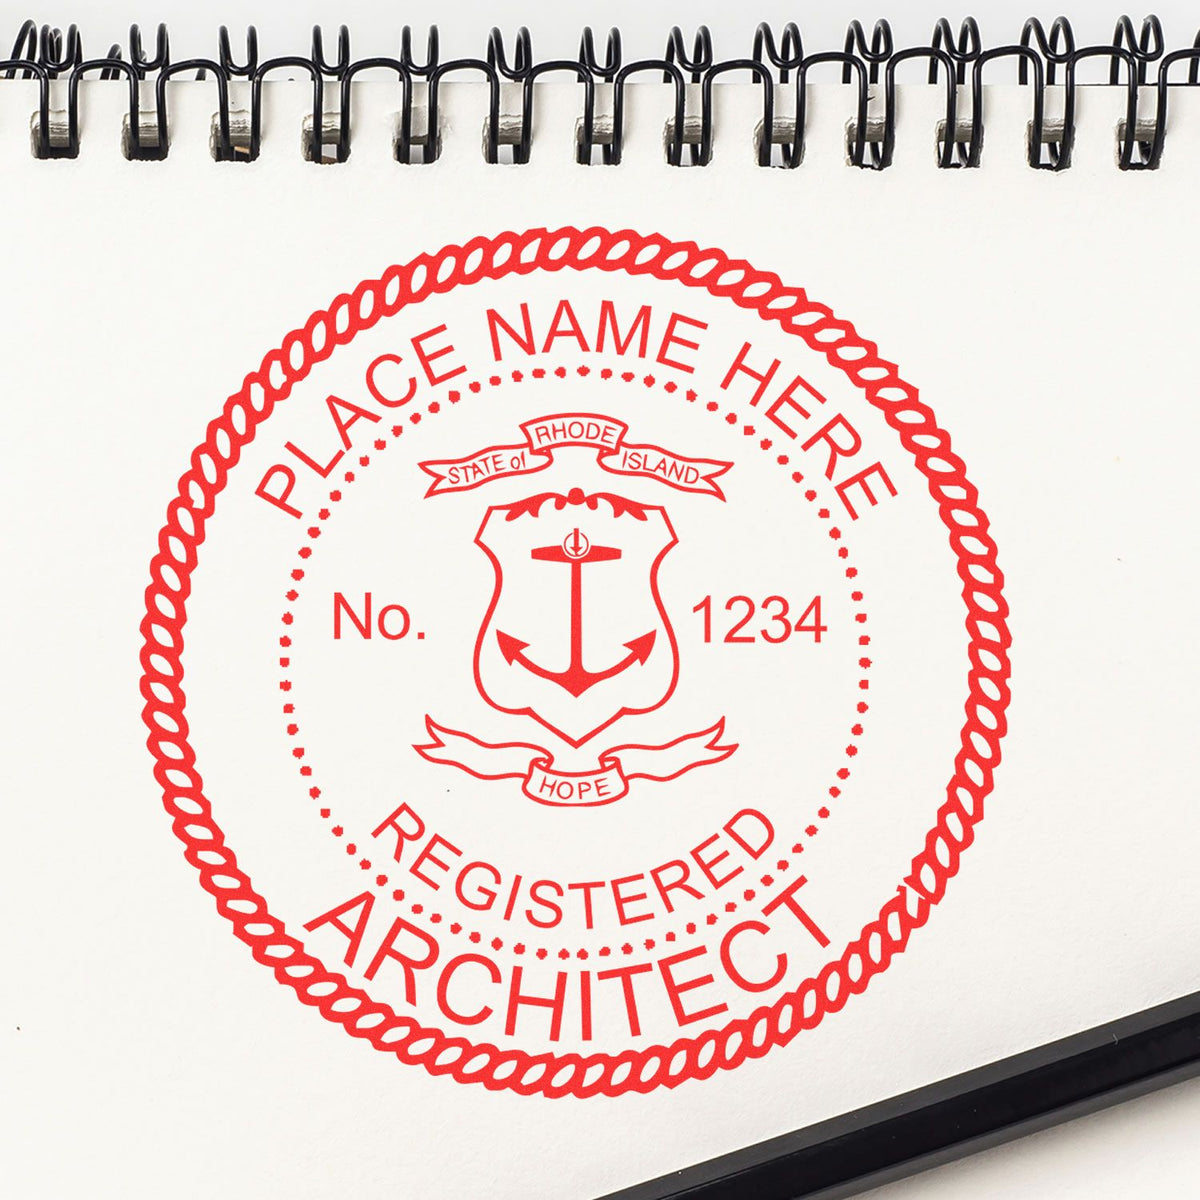 Slim Pre-Inked Rhode Island Architect Seal Stamp in use photo showing a stamped imprint of the Slim Pre-Inked Rhode Island Architect Seal Stamp